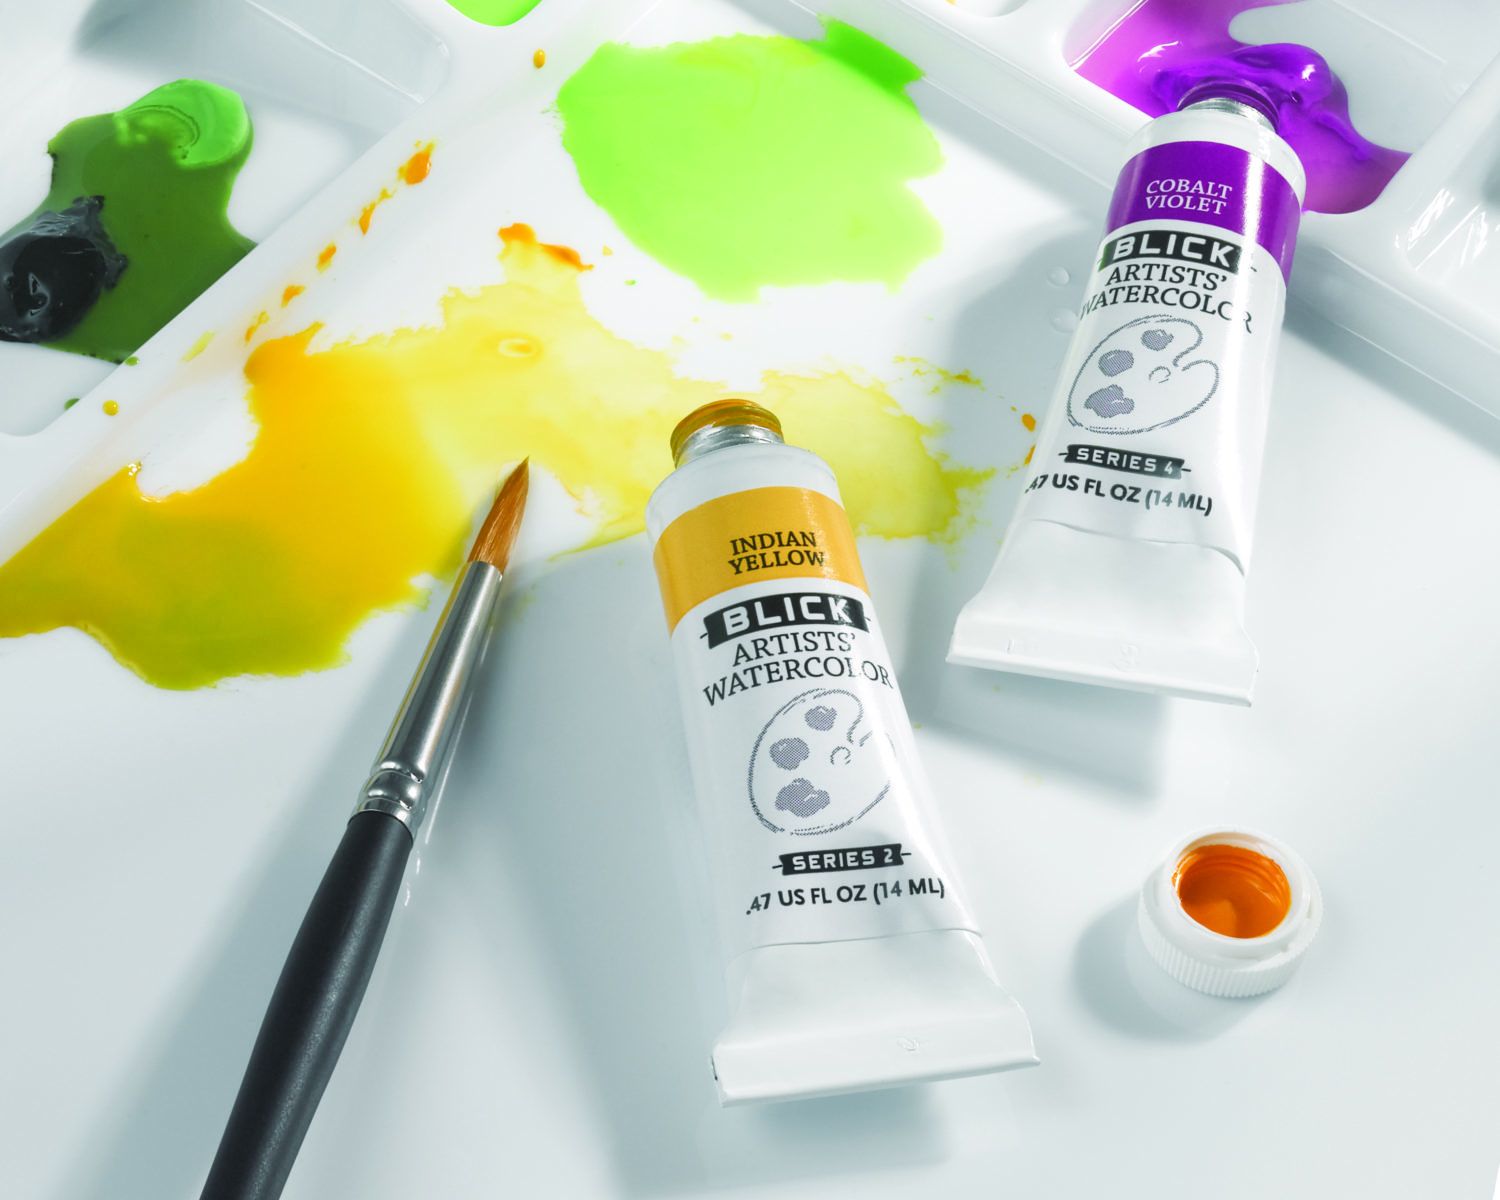 Watercolor Art Supplies  The Latest Pencils, Paints, Kits and More